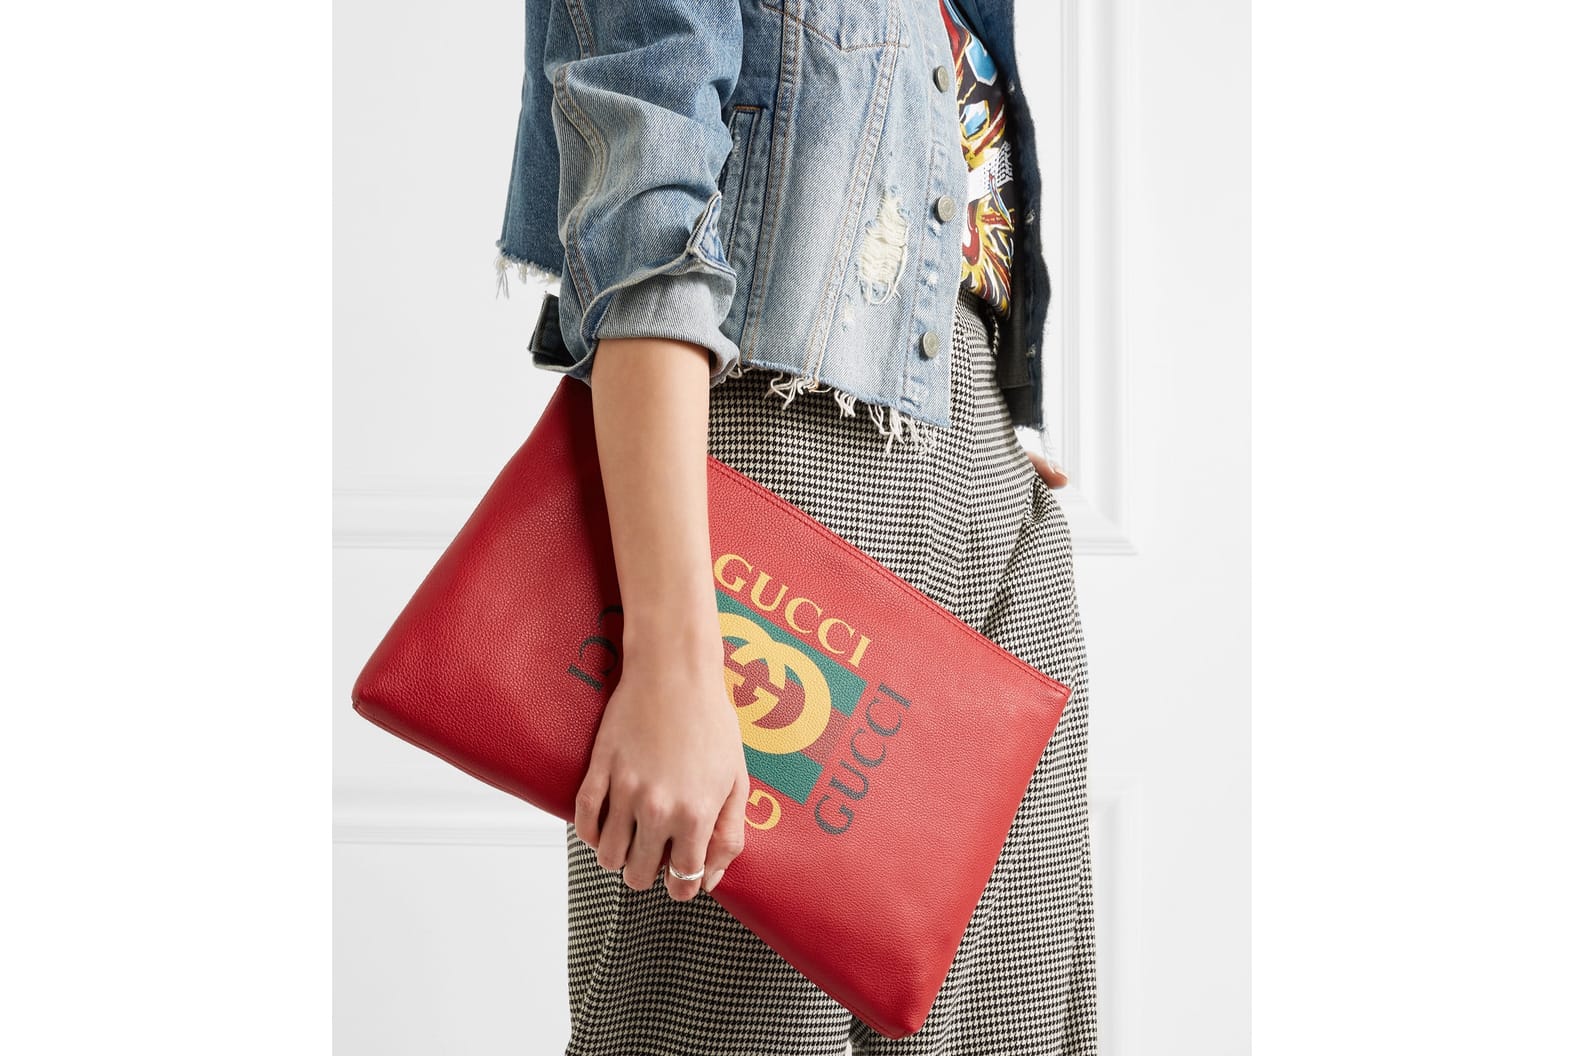 gucci red leather clutch